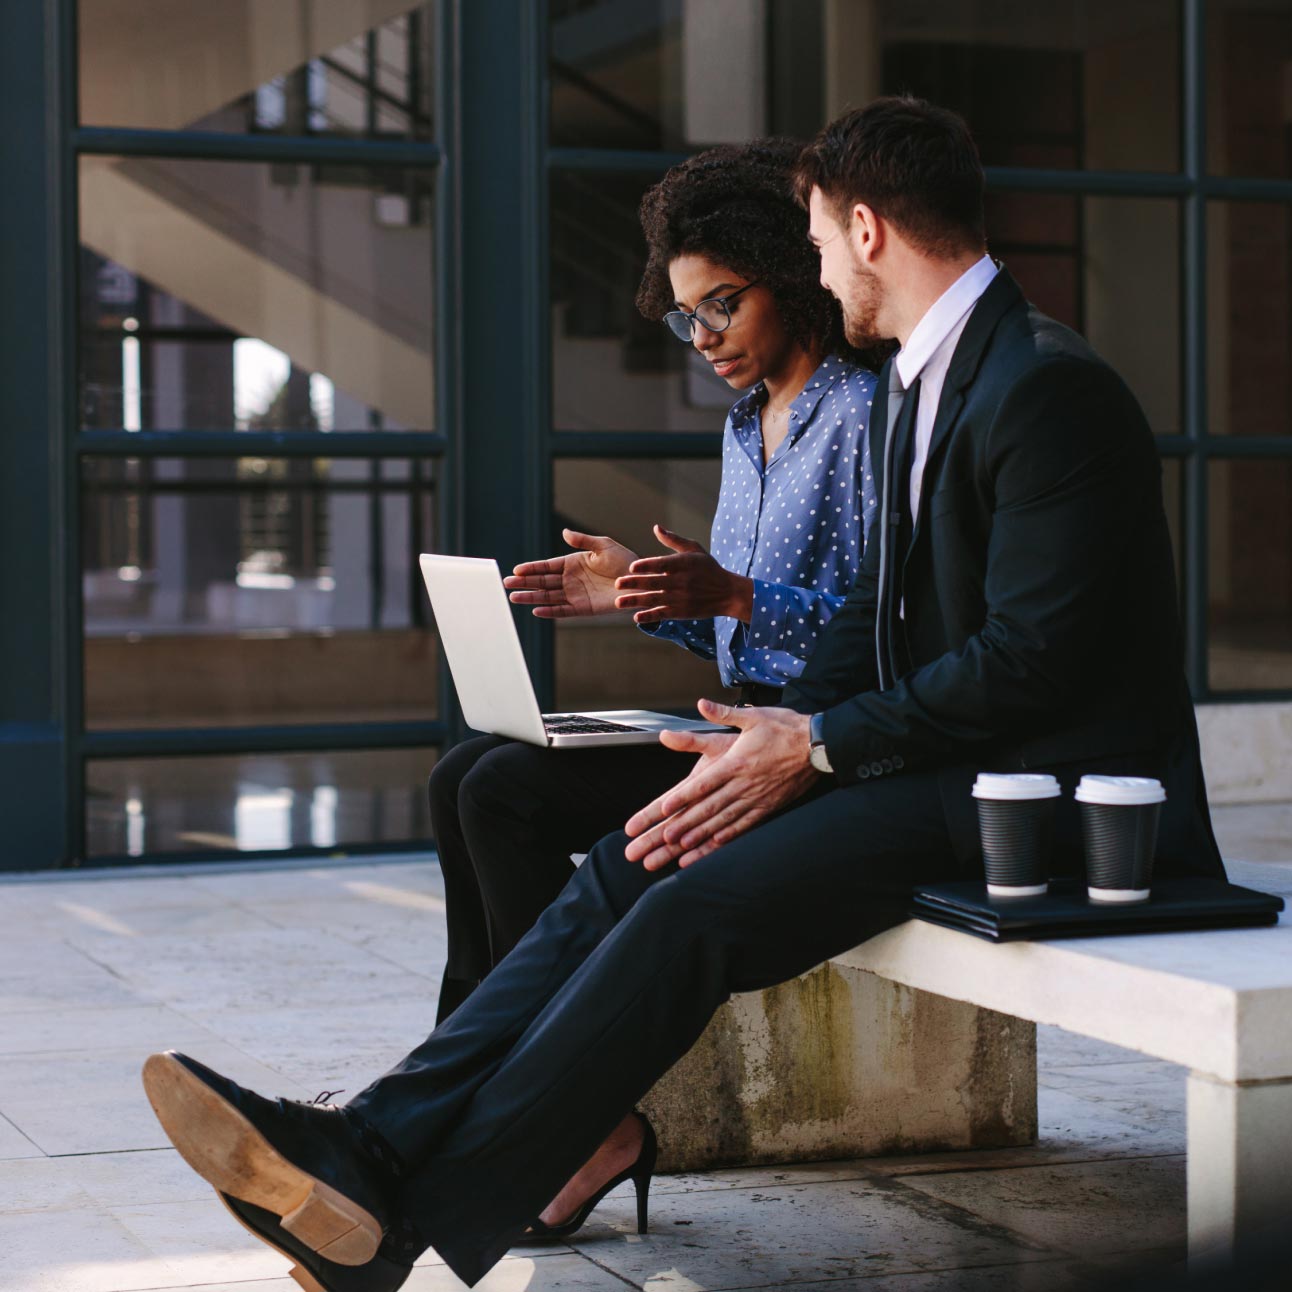 People enjoy secure connections on the go with Webex